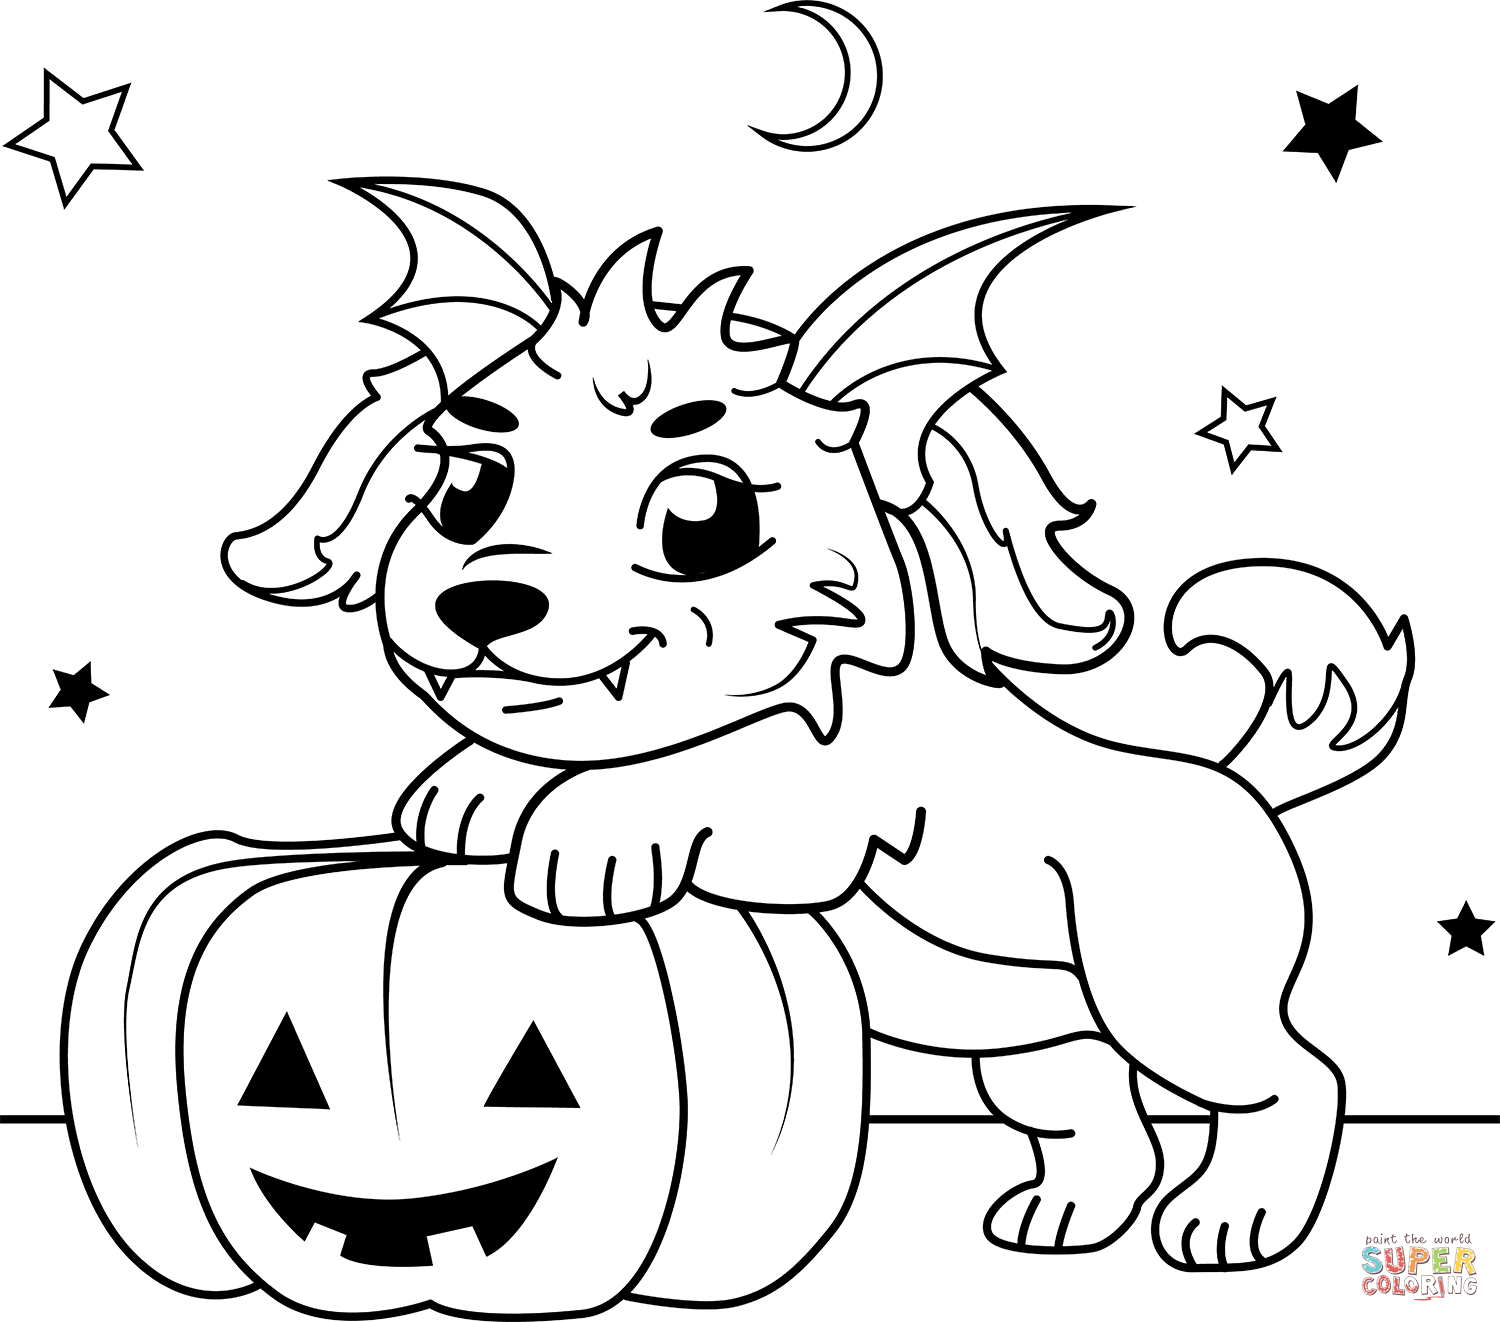 Halloween puppy coloring page free printable coloring pages